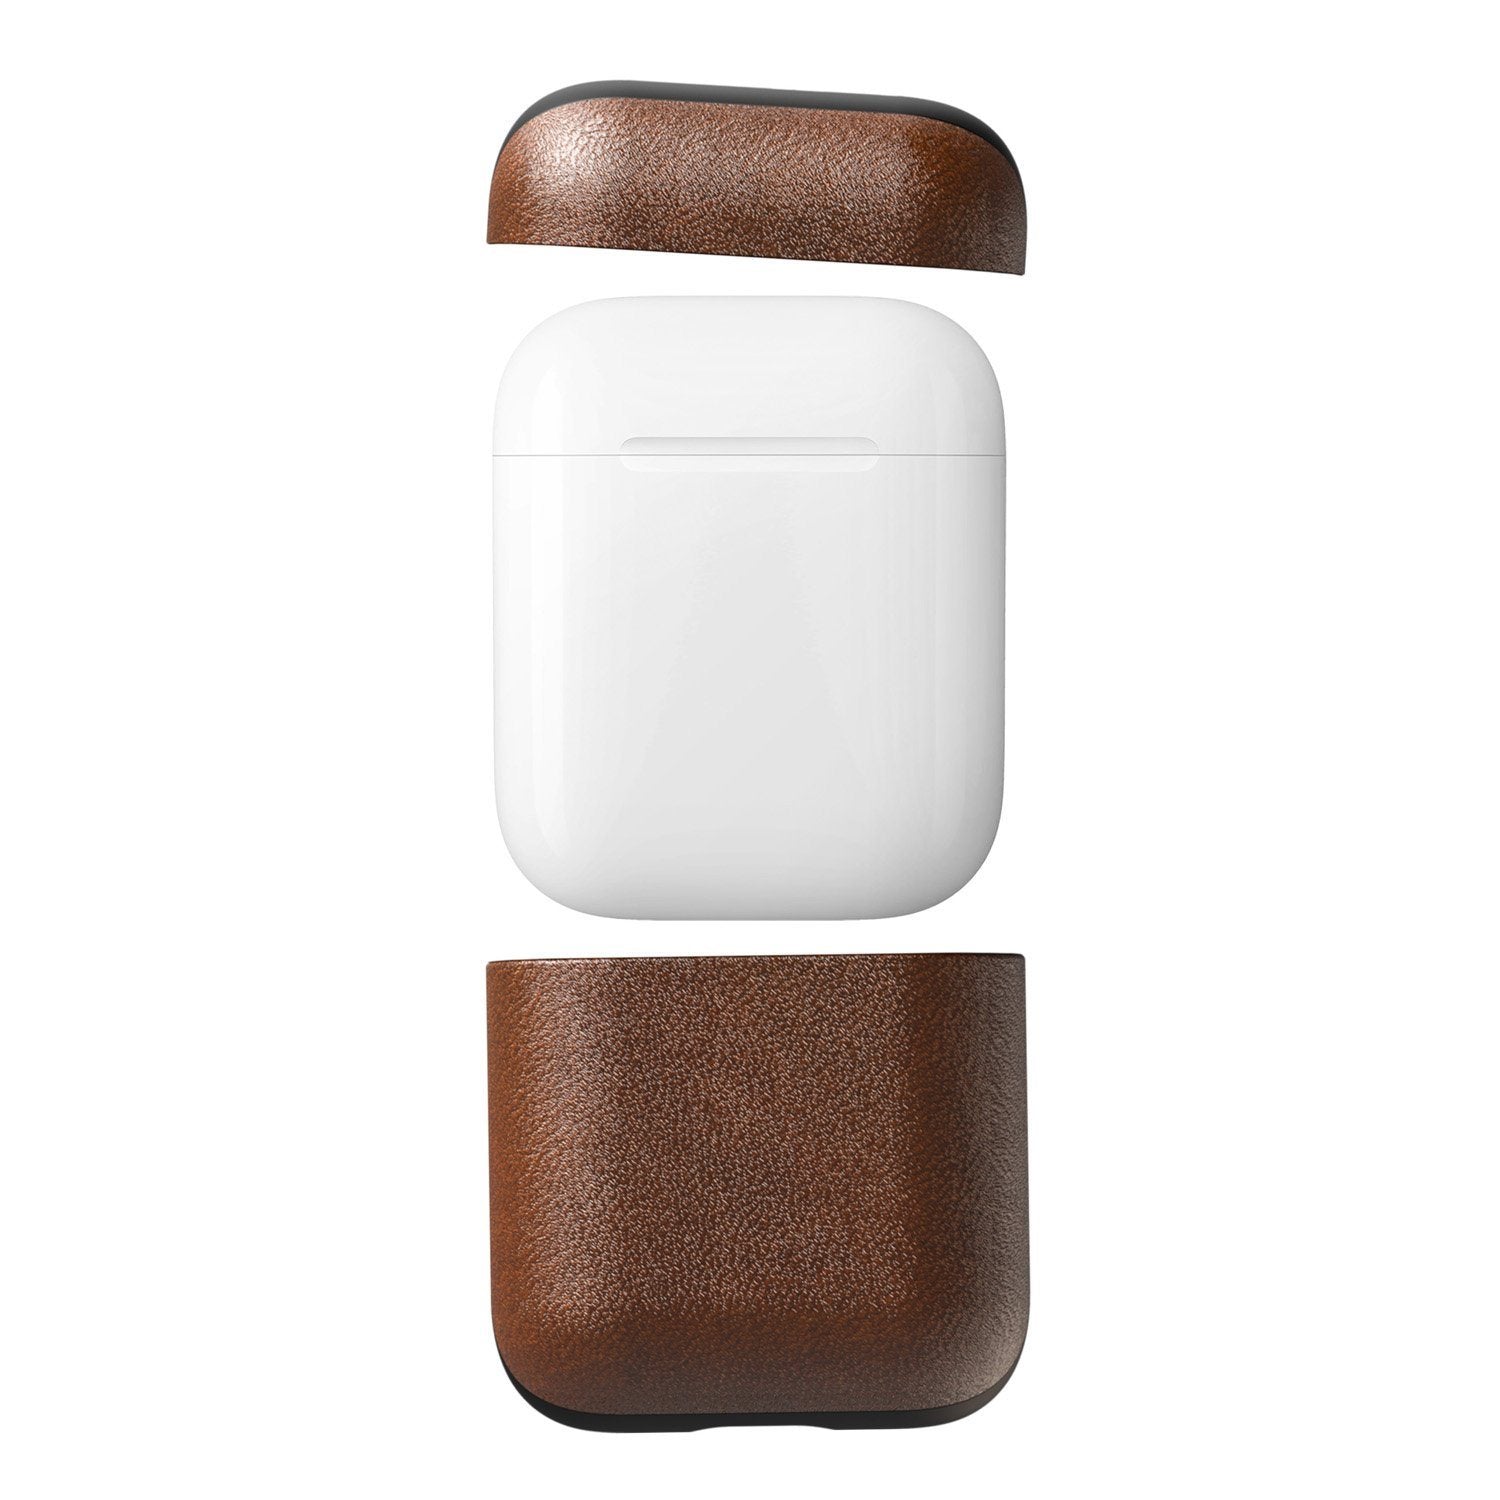 NOMAD Rugged Horween Leather Case for Airpods 1/2, Brown Airpods Case NOMAD 